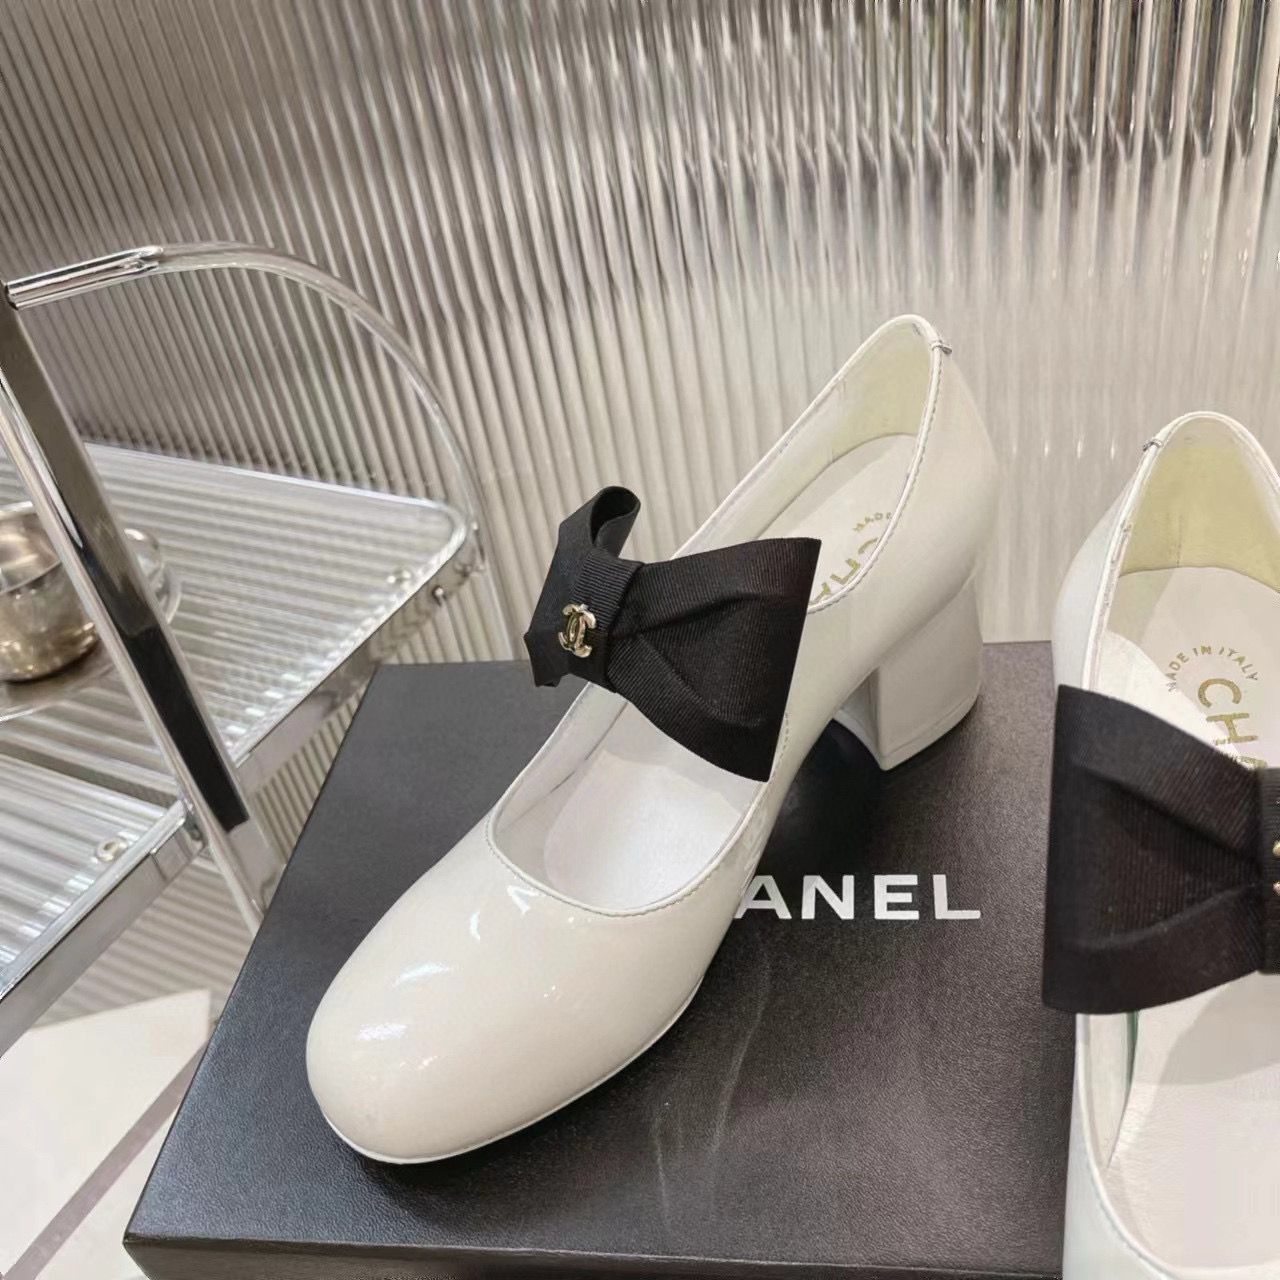 Chanel 24C Bow Mary Jane Shoes Original Patent Calf Leather 55MM Heels C85923 White